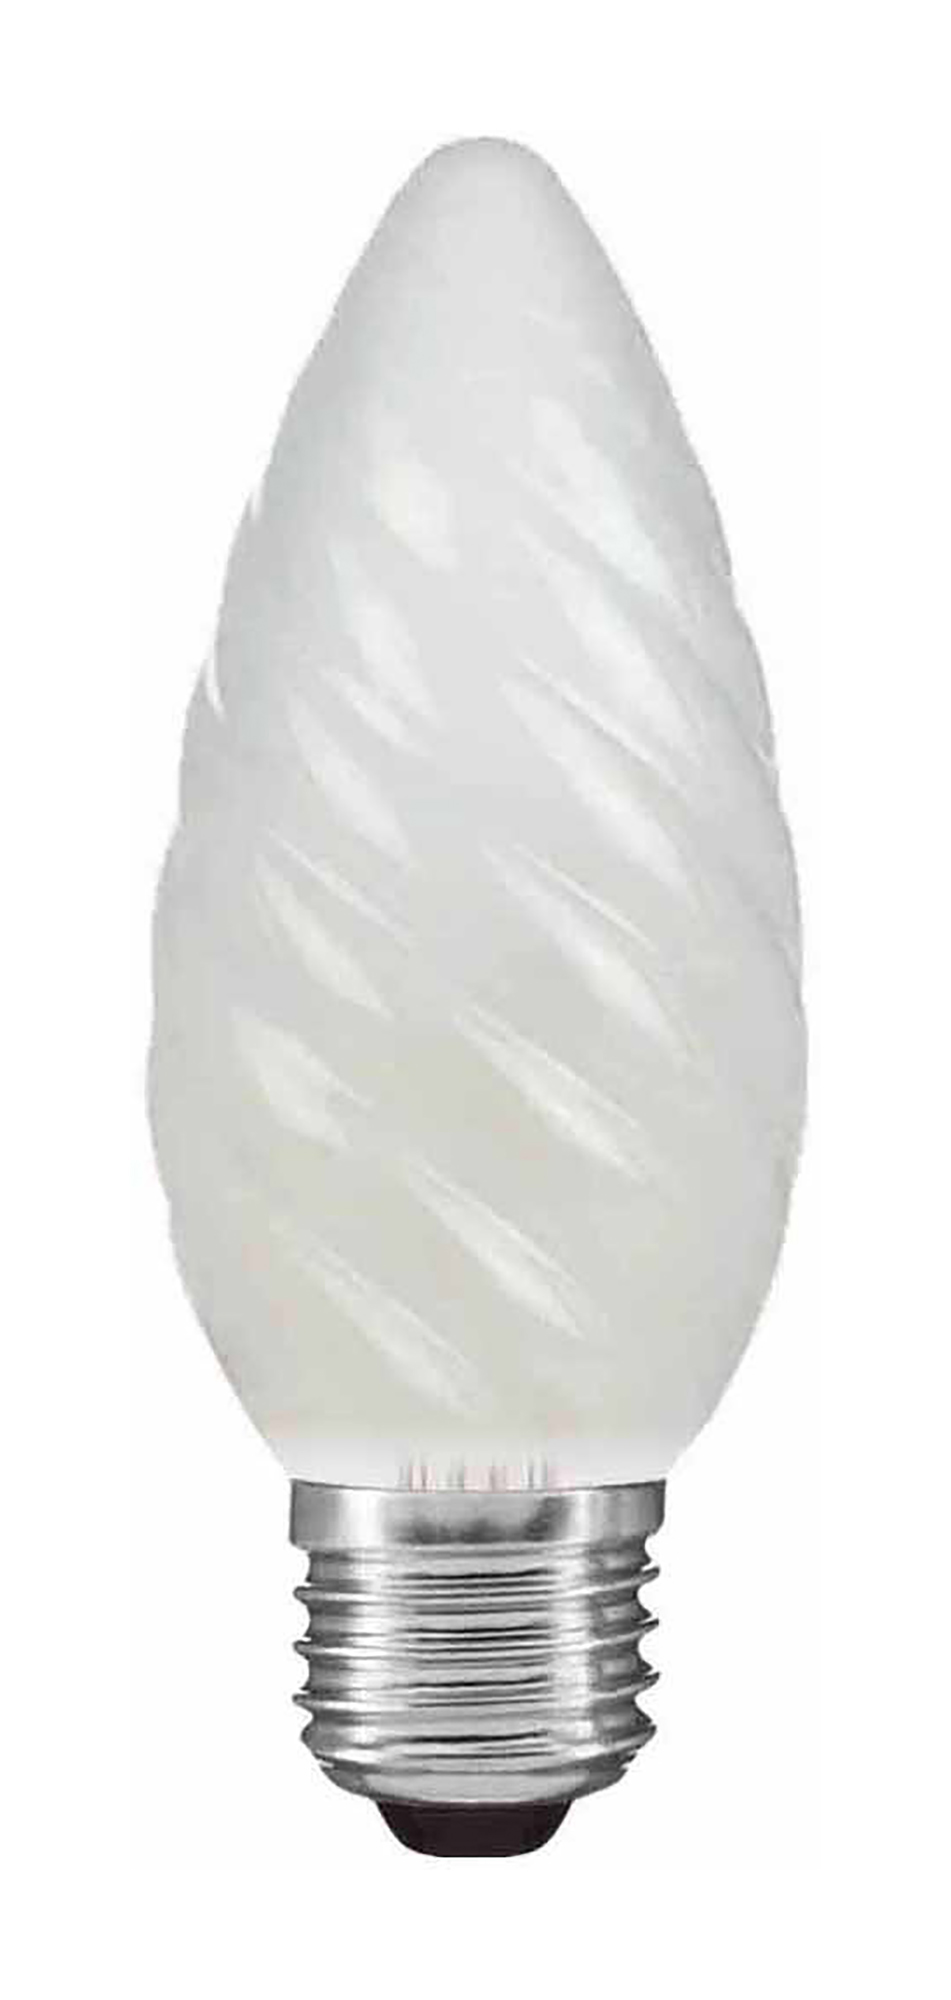 025127060  Candle 45mm Twisted Frosted E27 60W 2700K